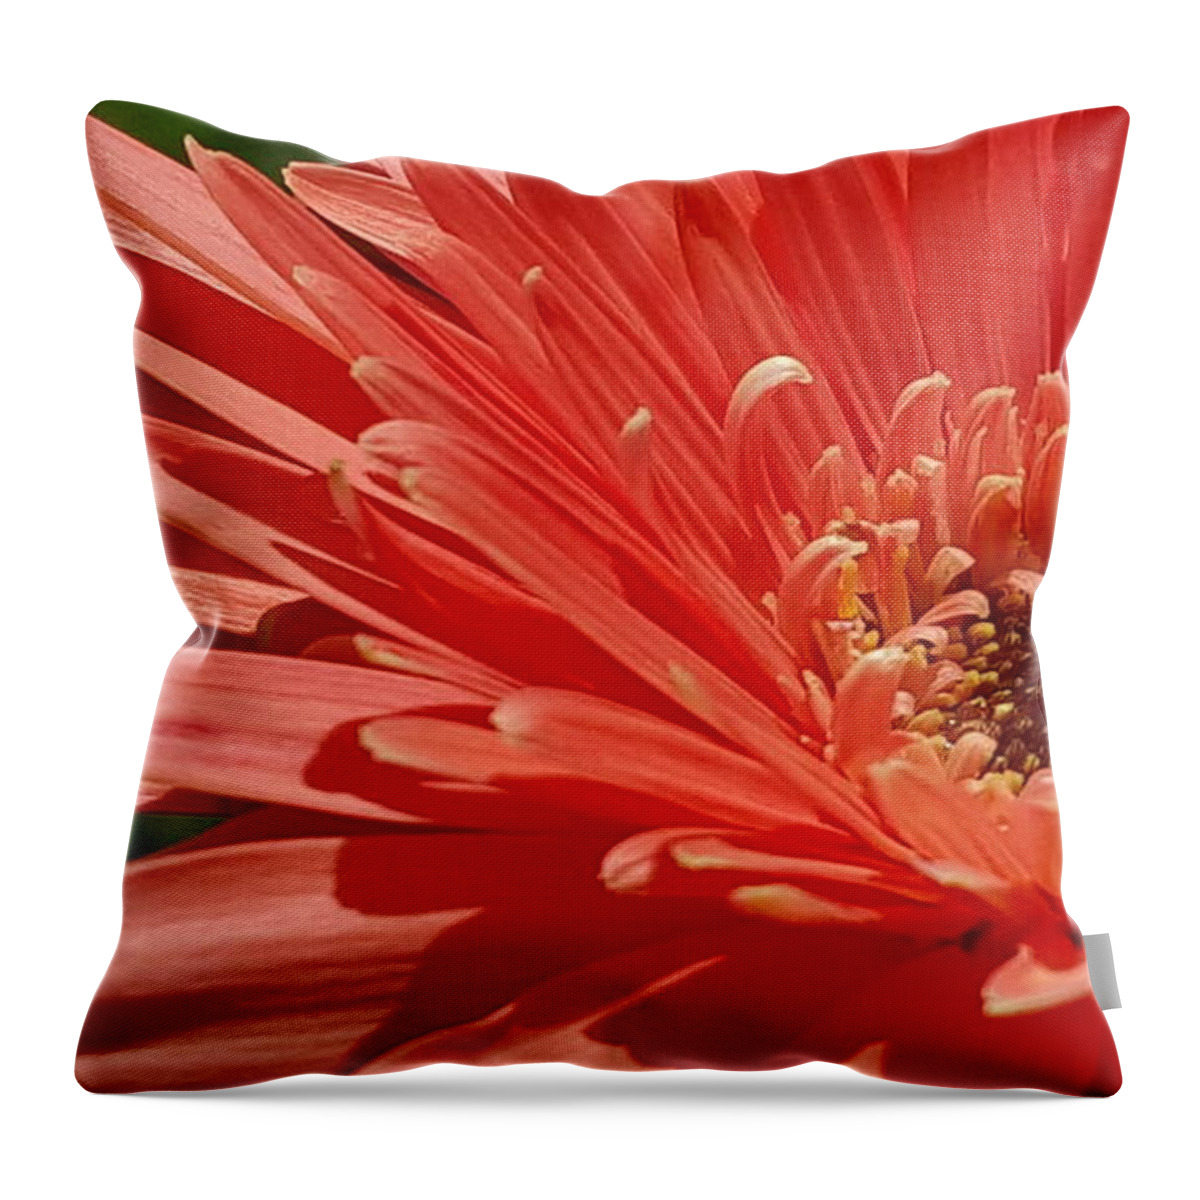 Flower Throw Pillow featuring the photograph After Showers by Dani McEvoy